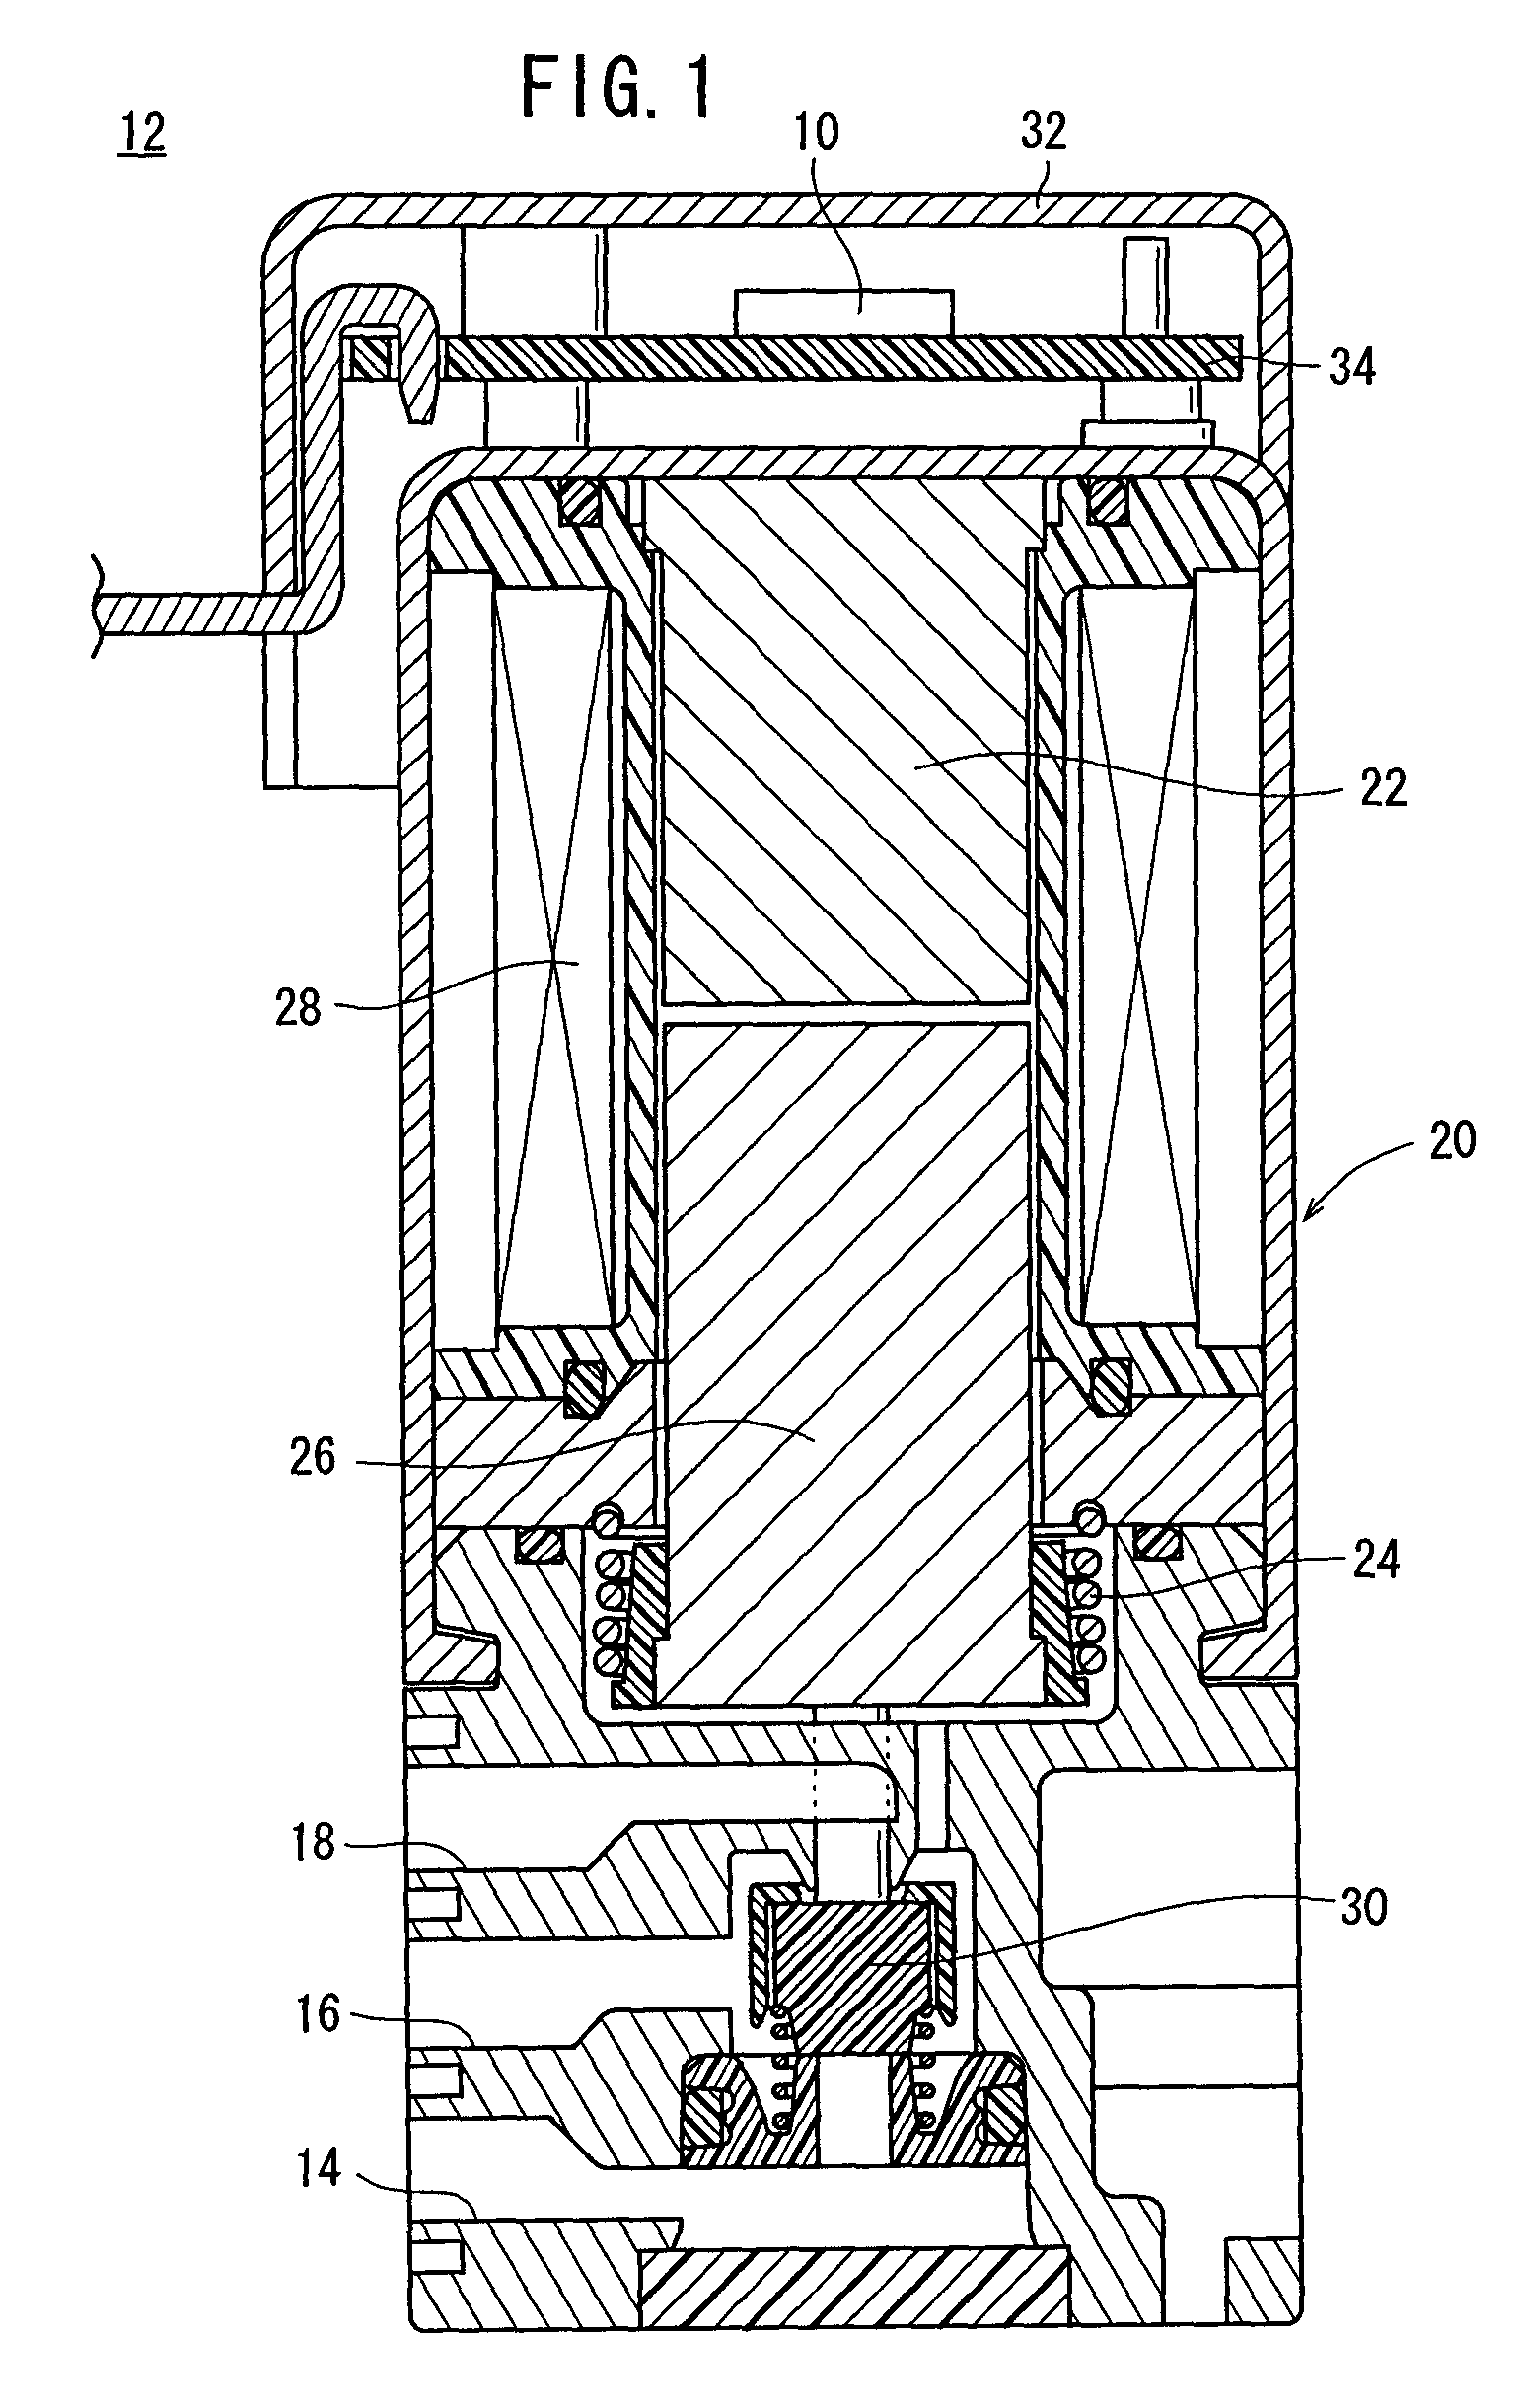 Solenoid-operated valve actuating controller